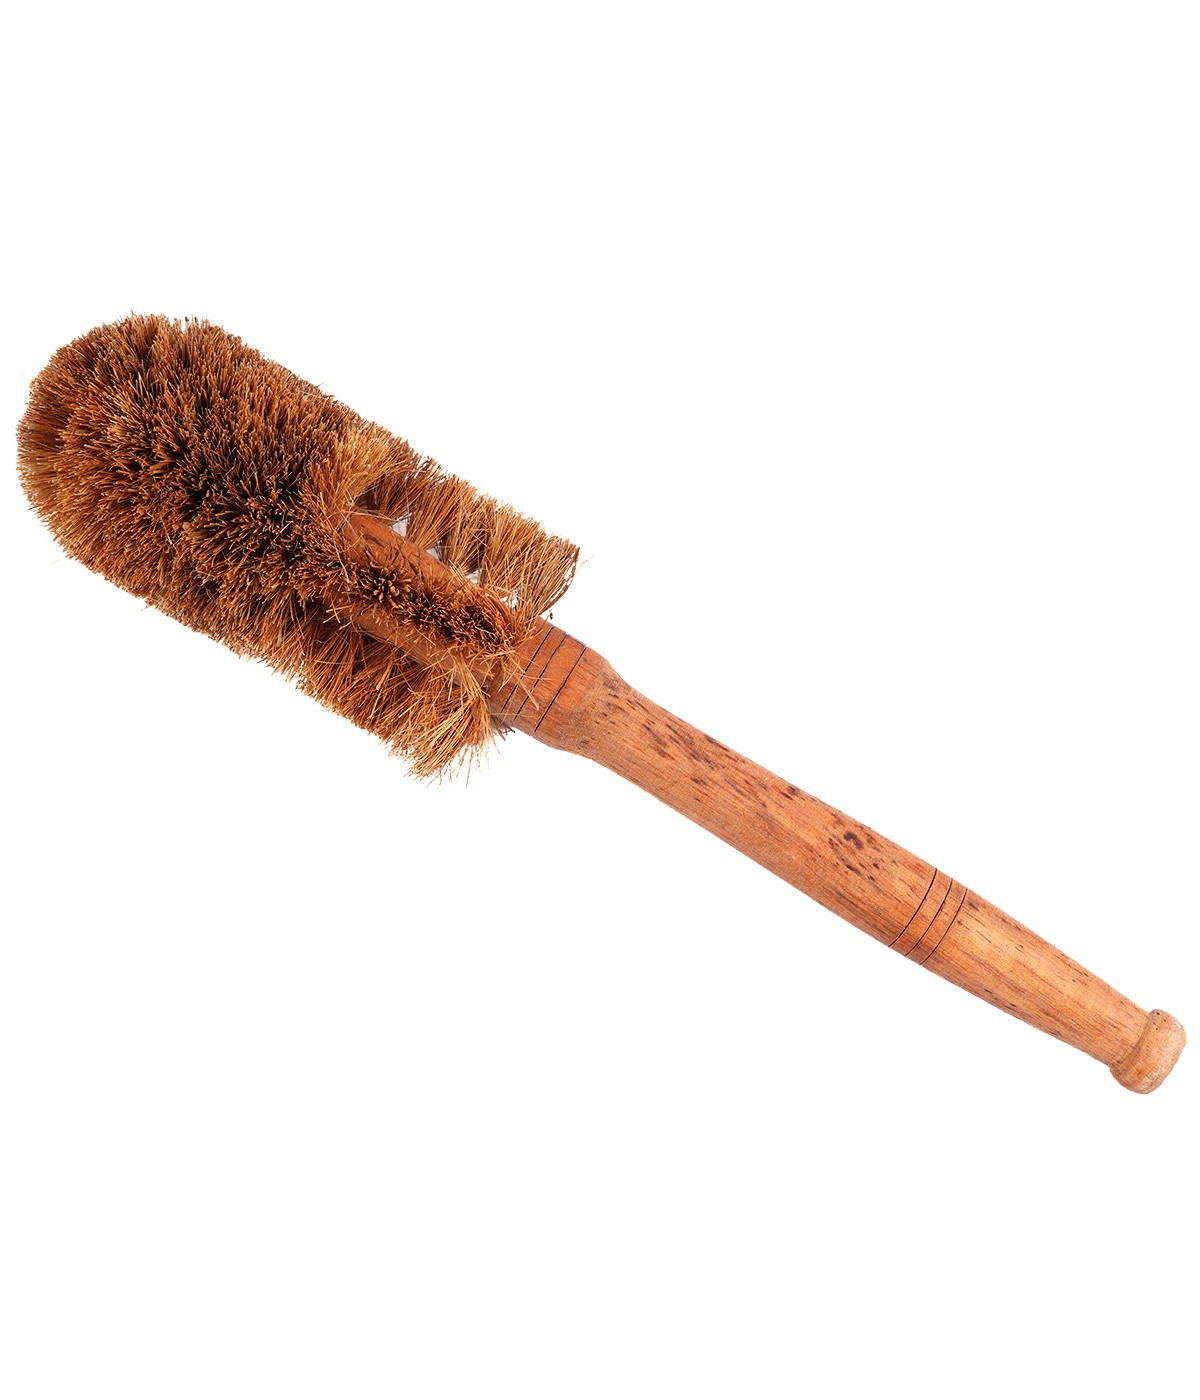 Natural Coir Bristle Toilet Brush - Eco-Friendly Cleaning for a Sparkling Bathroom – 18 inches Brown (pack of 1)